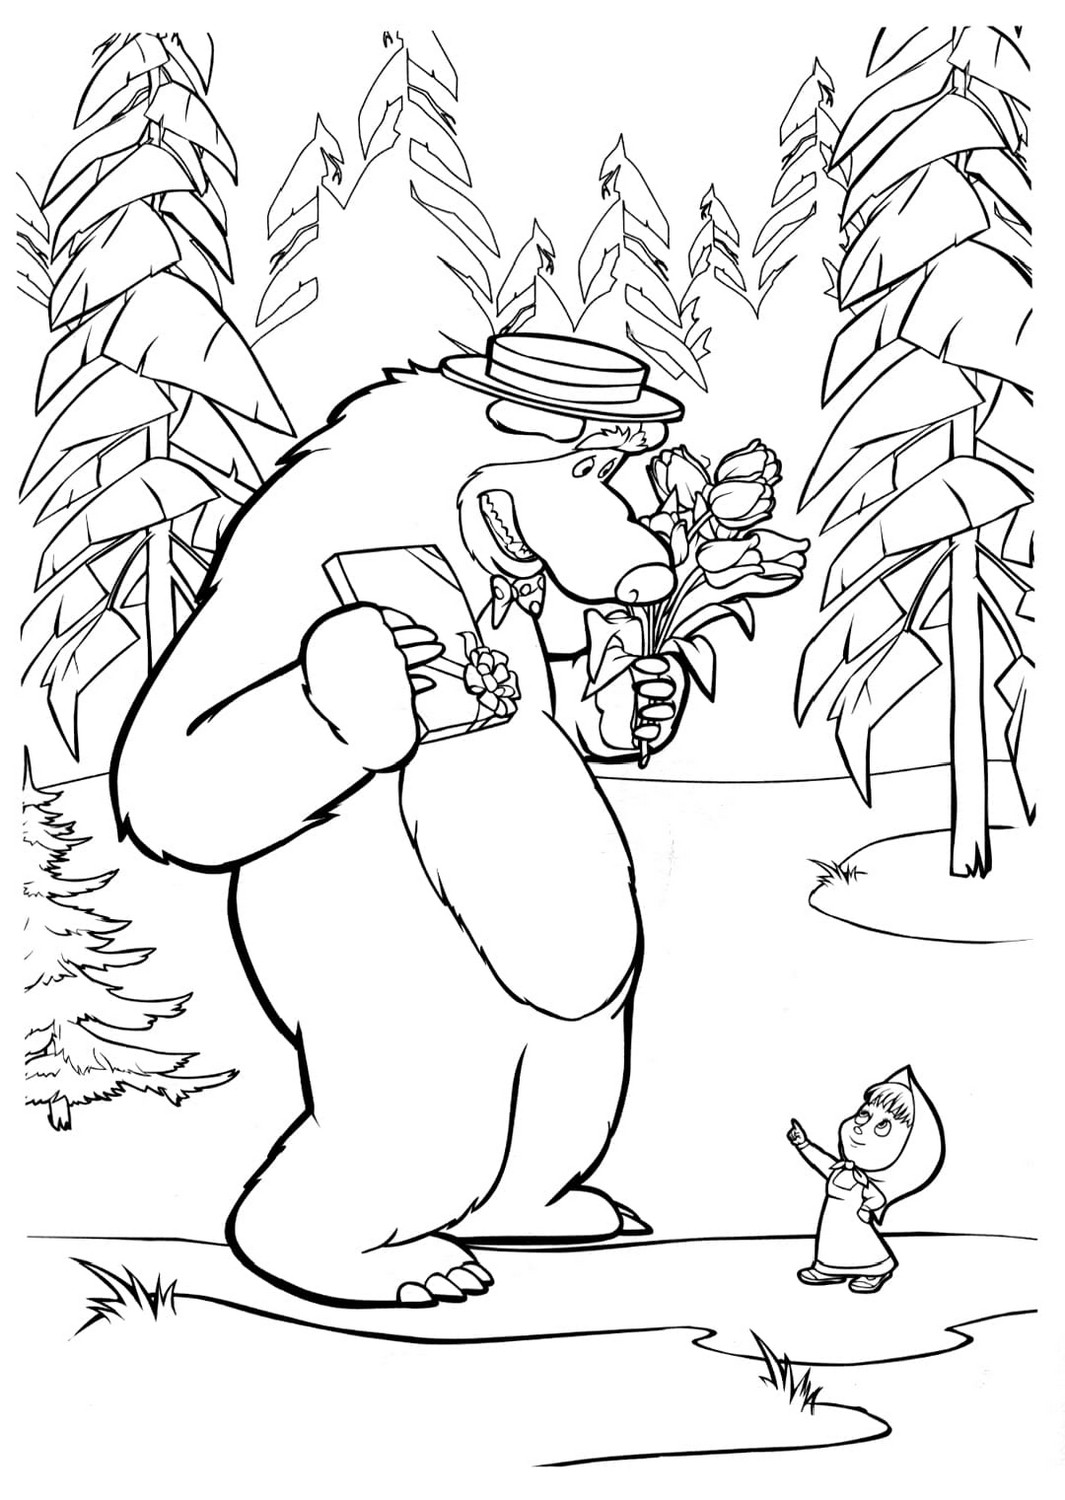 Drawing 07 of Masha and the Bear to print and color